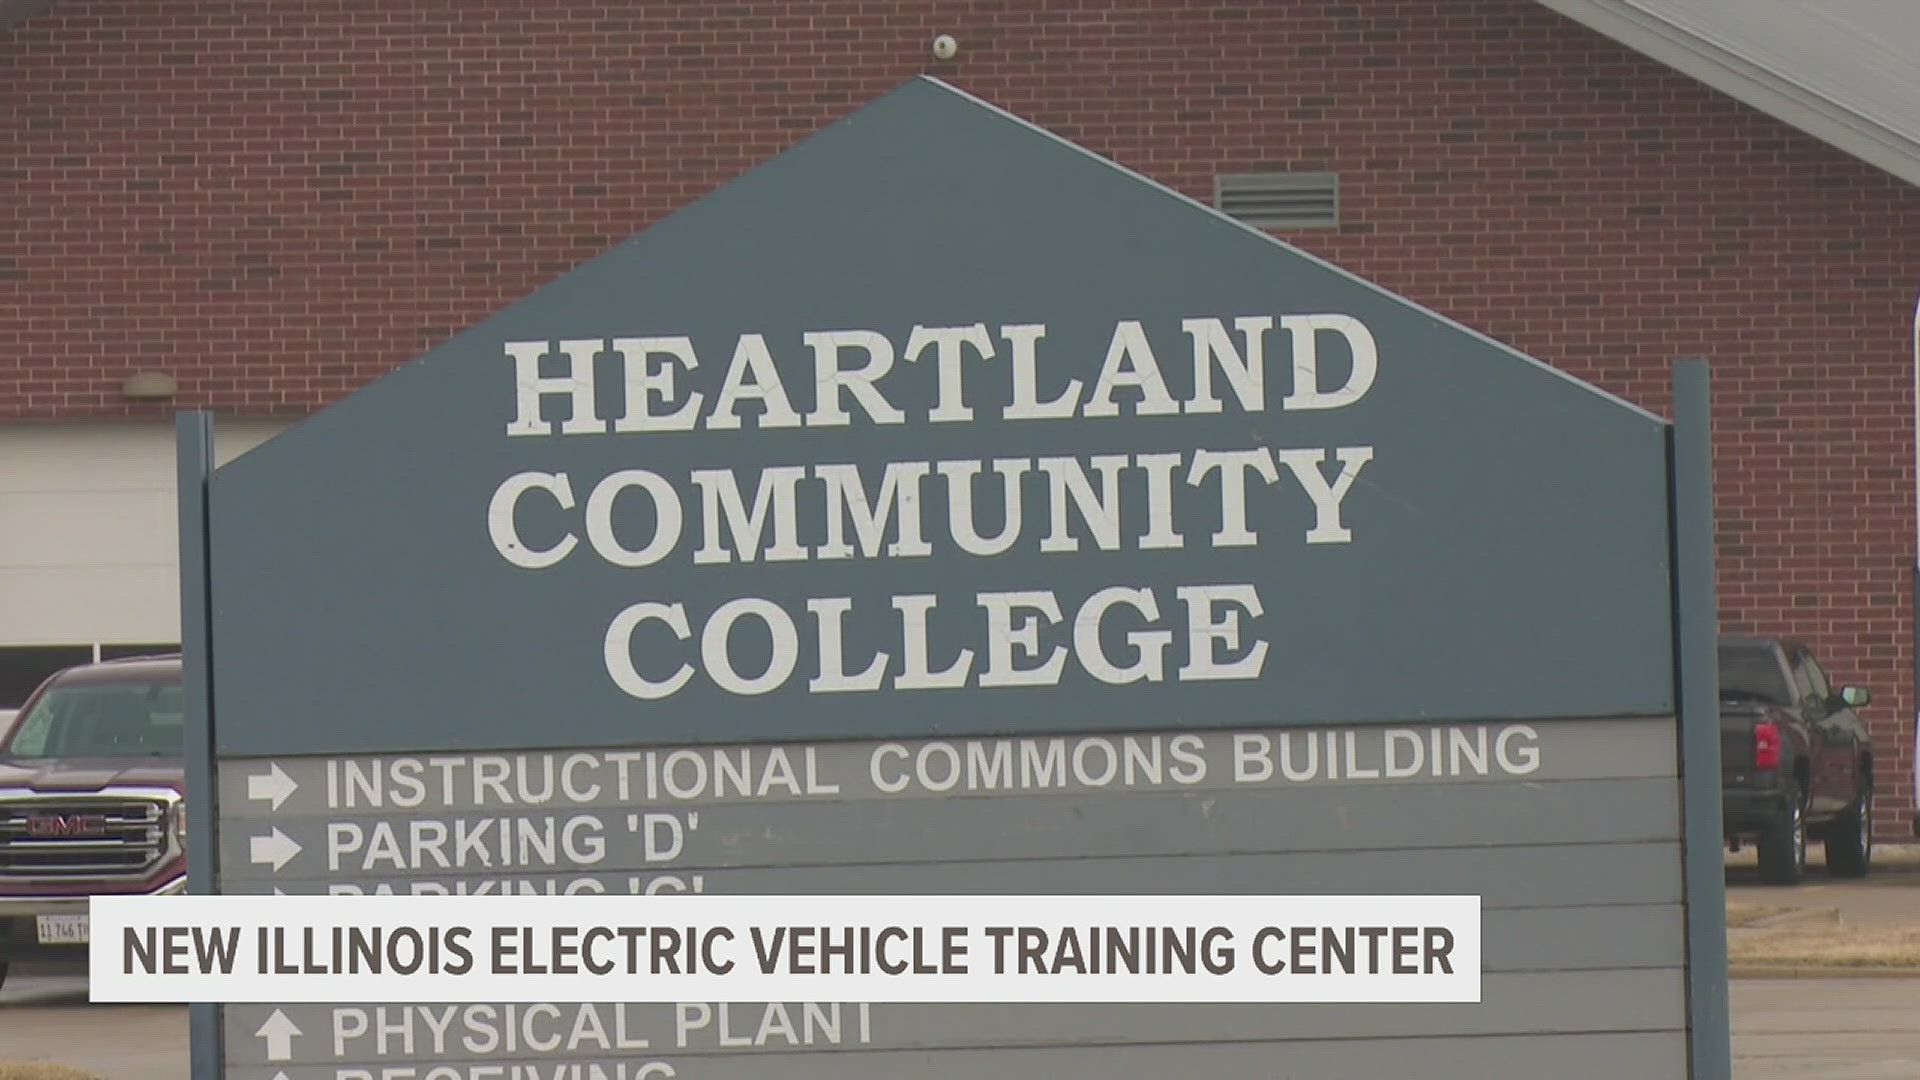 The state sent more than $7 million to Heartland Community College for the facility. Students will learn about EV and energy storage technologies.